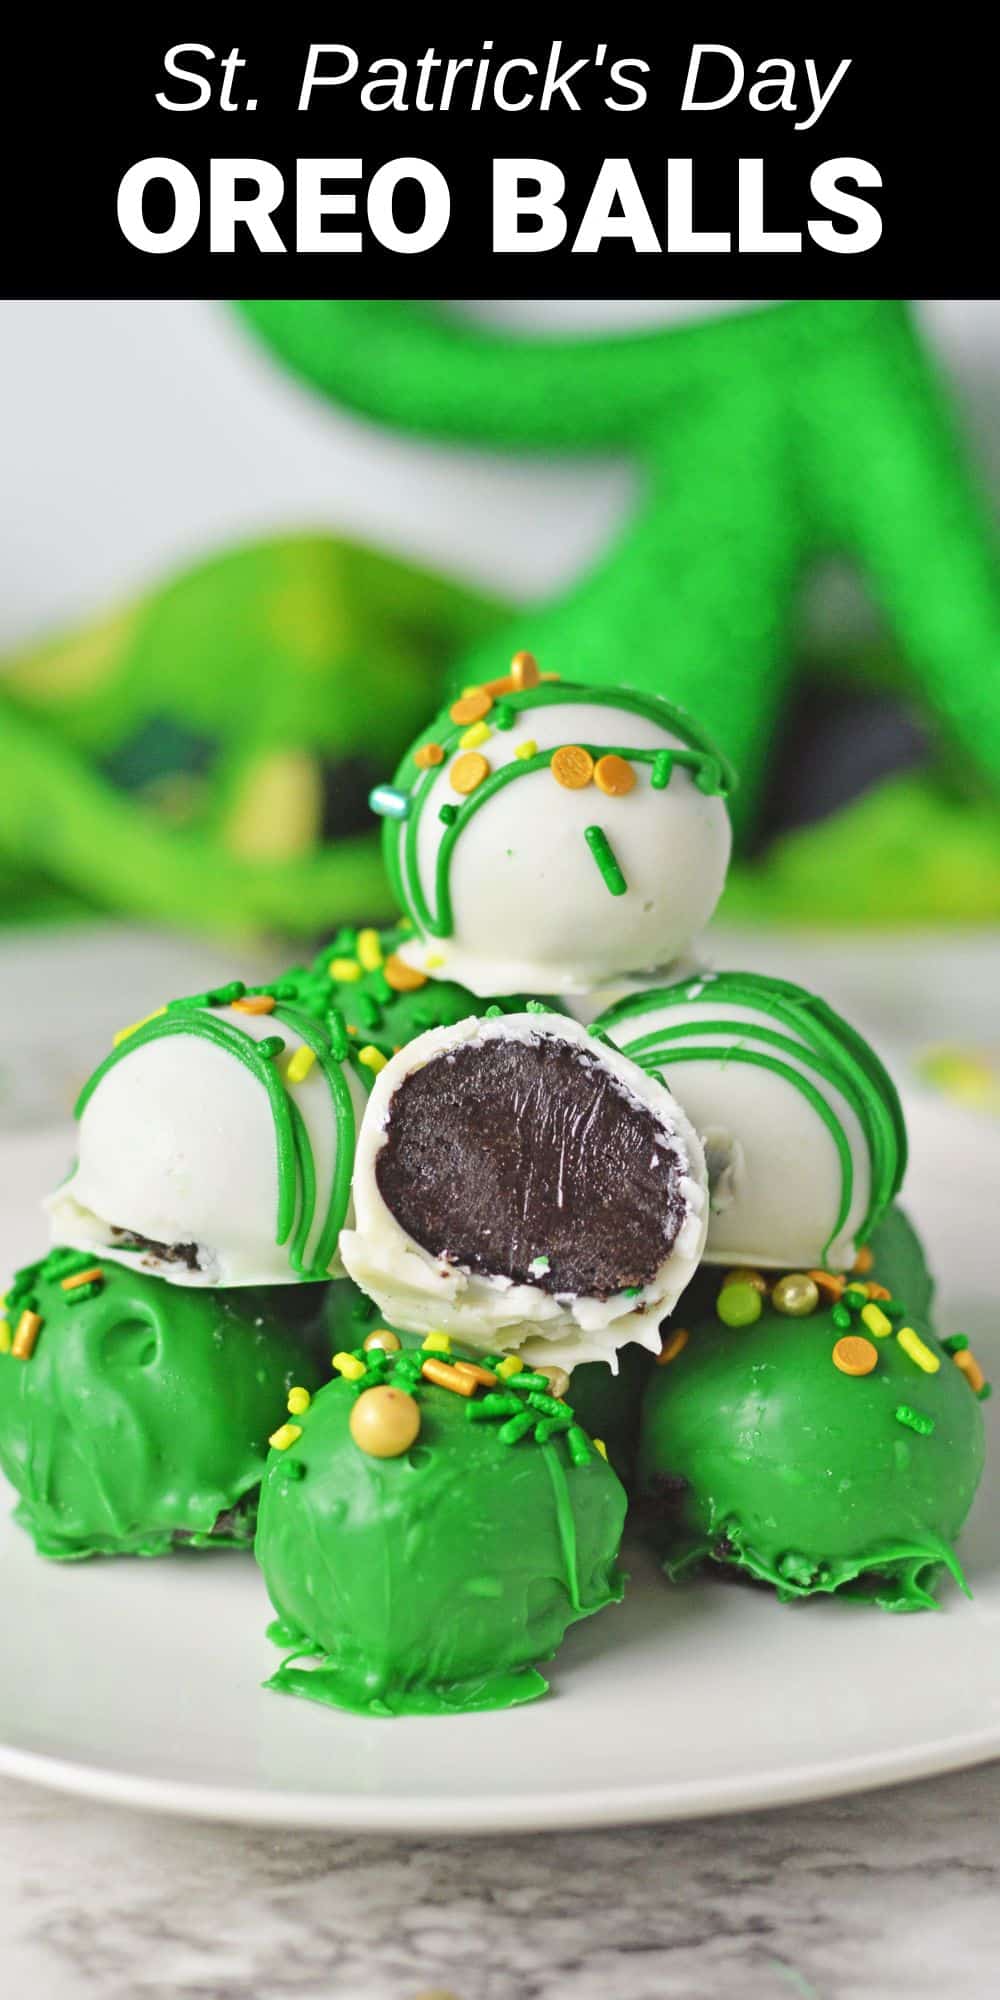 These Mint Oreo balls are a delicious truffle-like treat that’s perfect for celebrating St. Patty’s Day. Creamy chocolate and cool mint are a match made in heaven, and this easy recipe combines these flavors to create an irresistible bite-size dessert in the perfect festive shade of green.